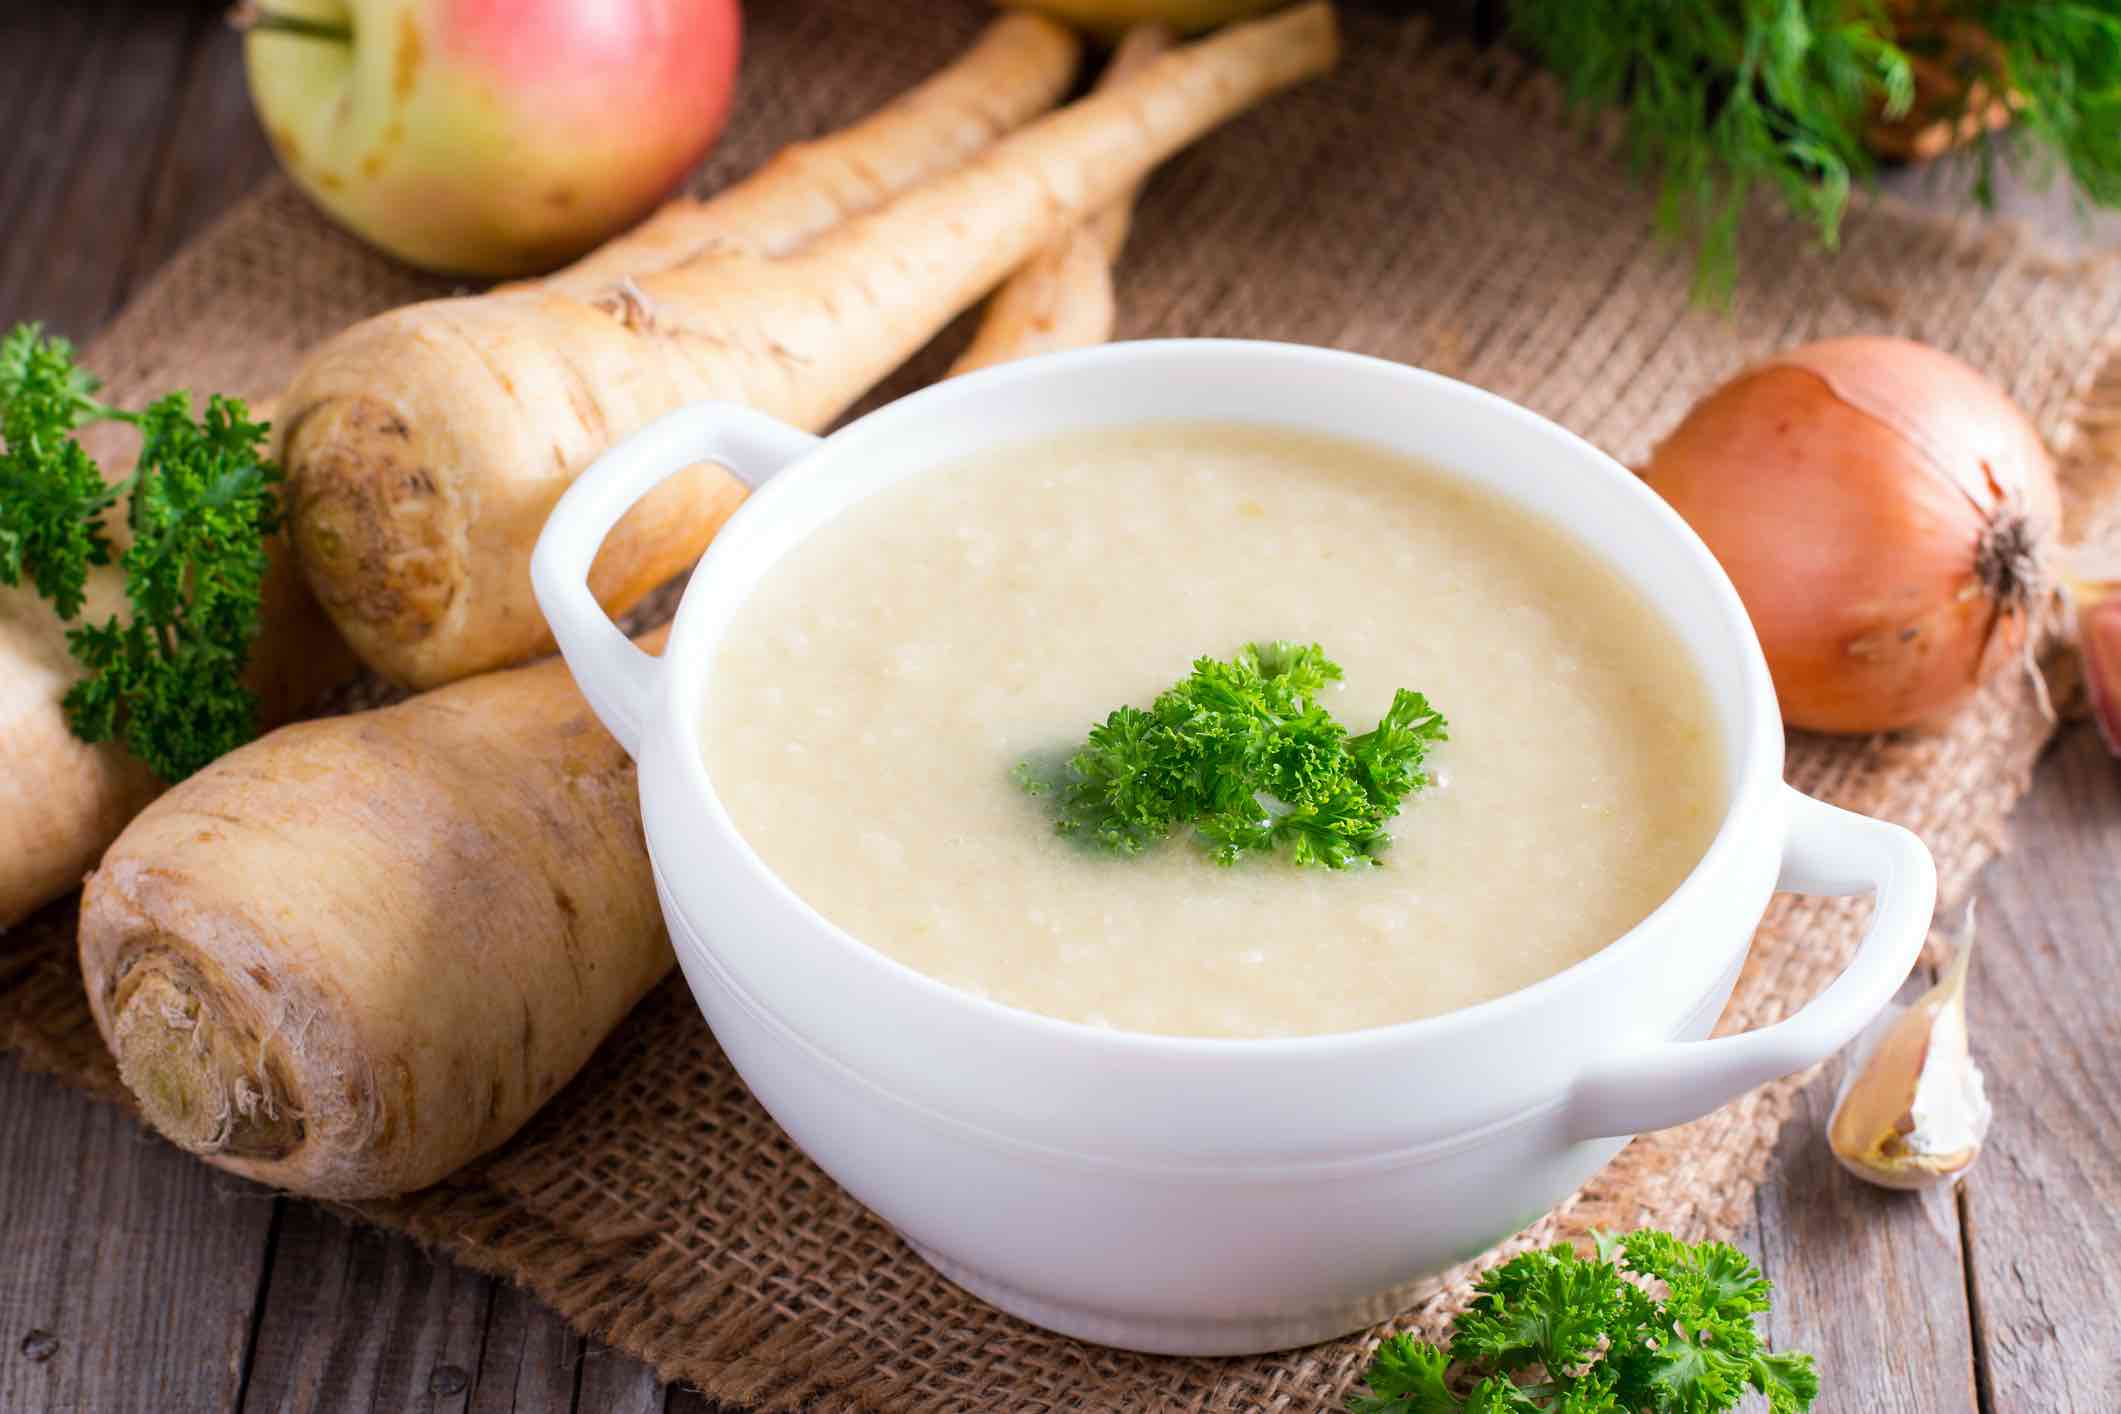 Jean Trebek's Roasted Parsnip & Pear Soup is Creamy, Nutty Goodness! —Reliable Recipes on insidewink.com